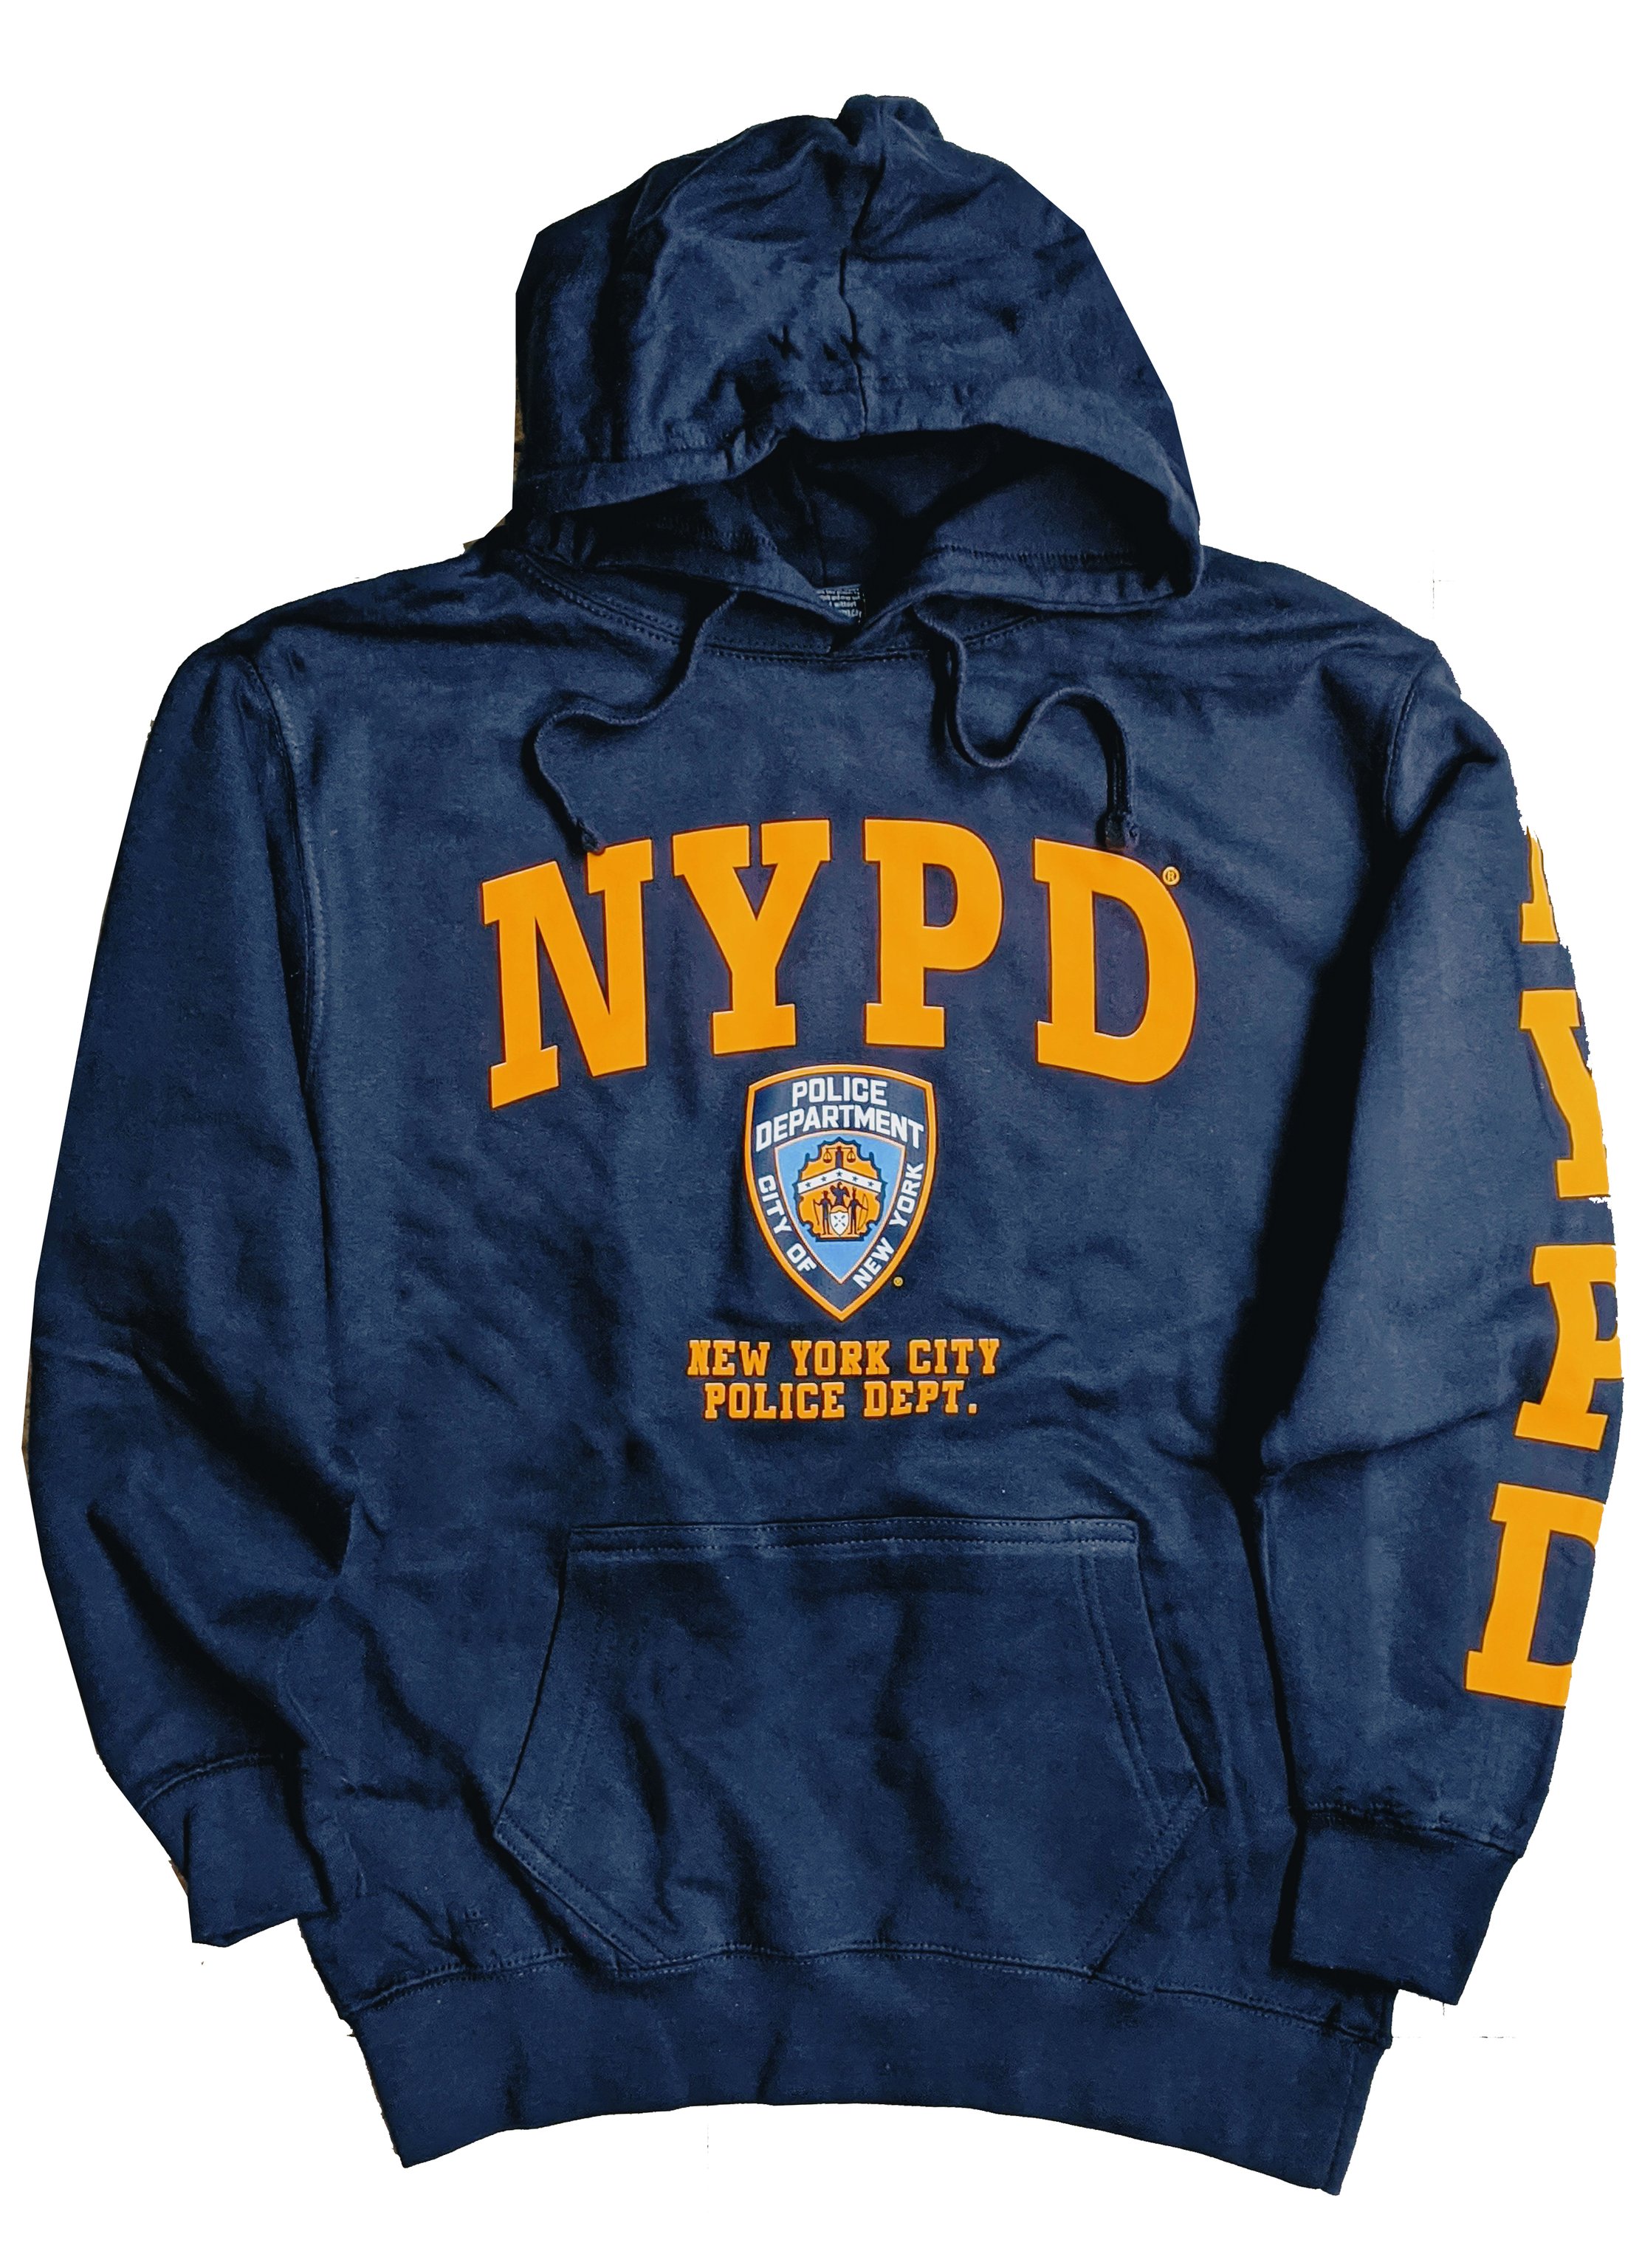 NYPD Men's Hoodie Sweatshirt Officially Licensed (Front & Sleeve Print, Navy & Gold)